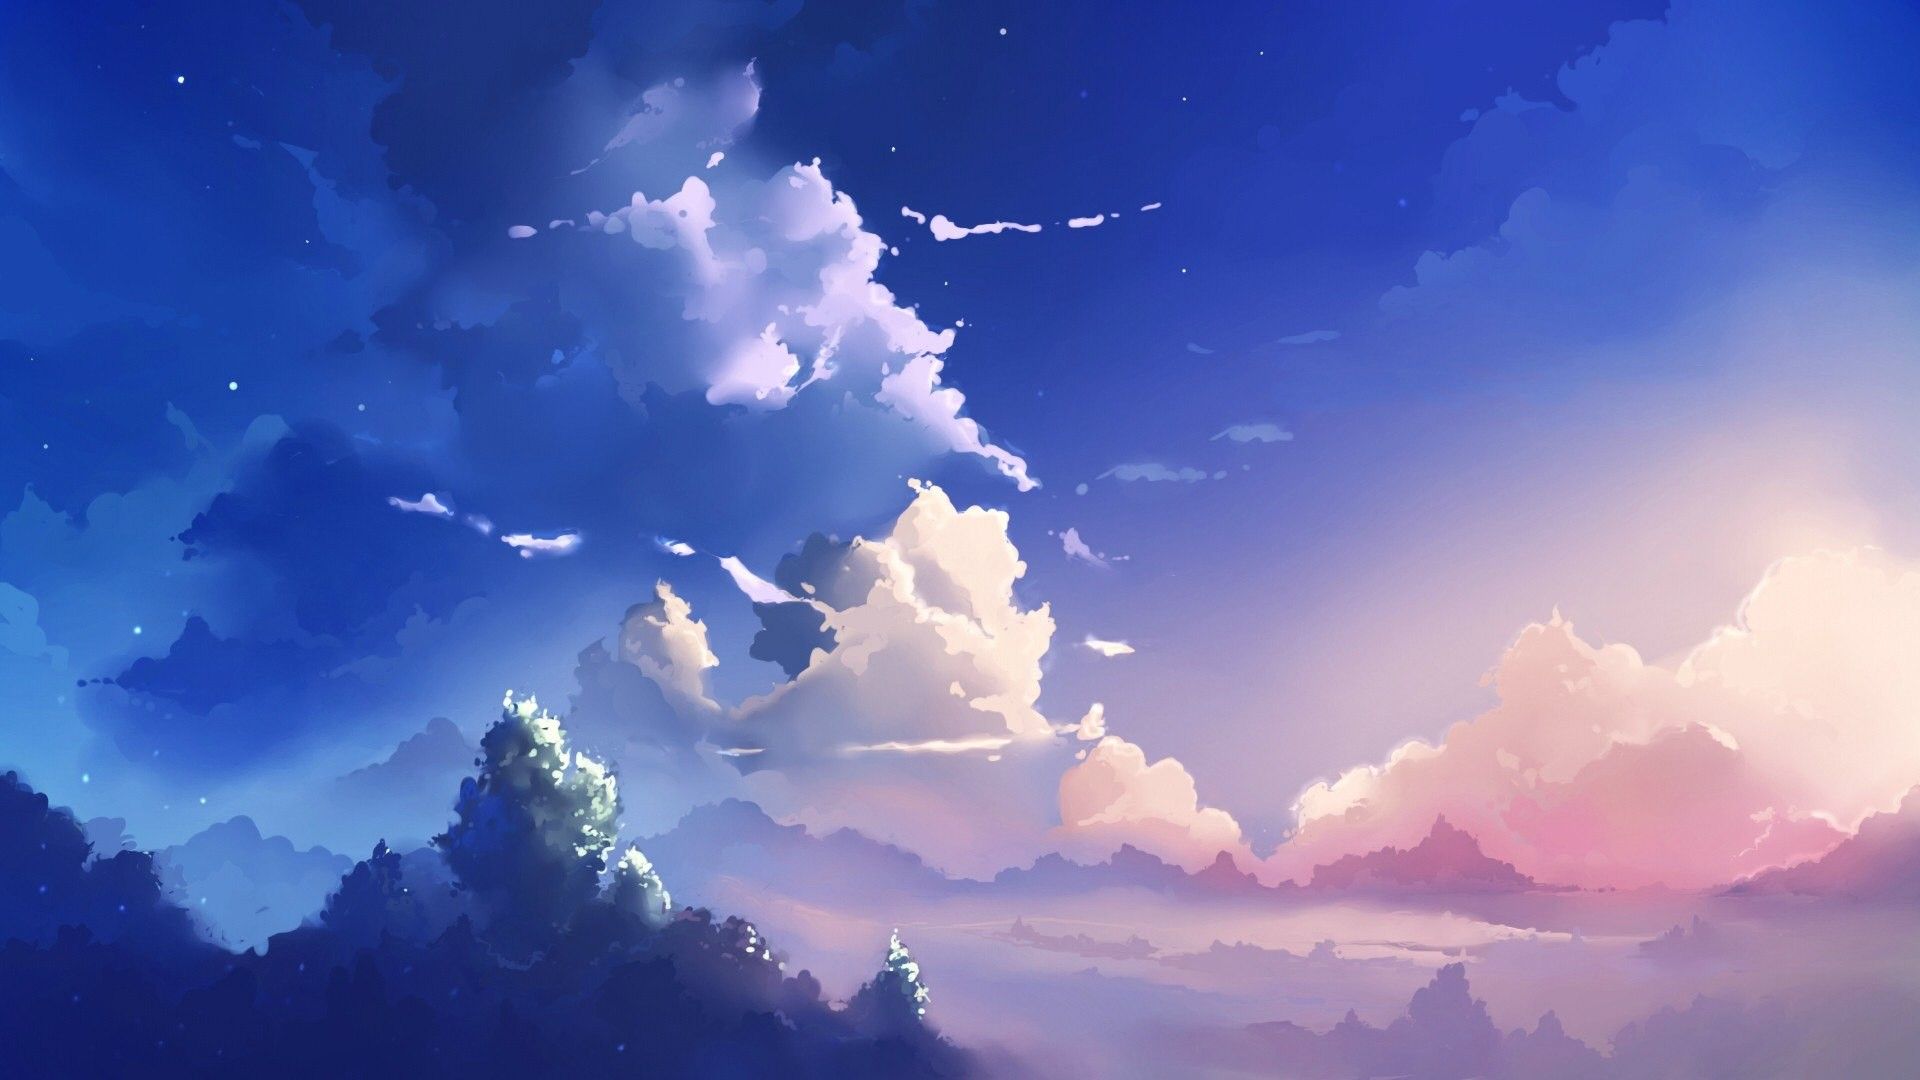 A painting of clouds and mountains in the sky - Landscape, anime landscape, 1920x1080, blue anime, Japan, HD, scenery, Japanese